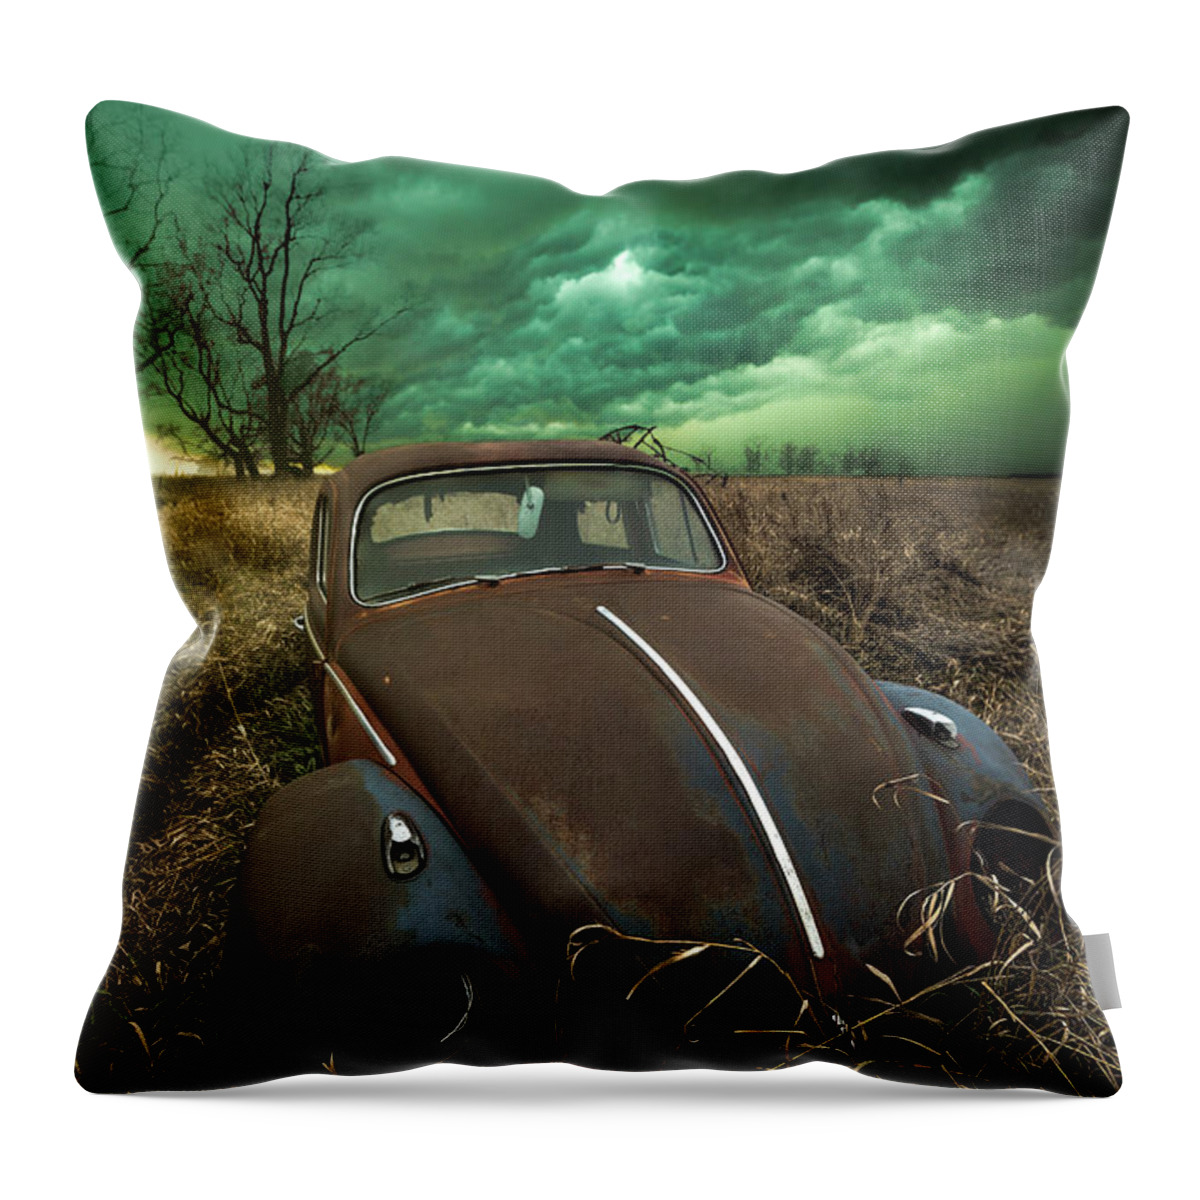 Rust Throw Pillow featuring the photograph Bug by Aaron J Groen